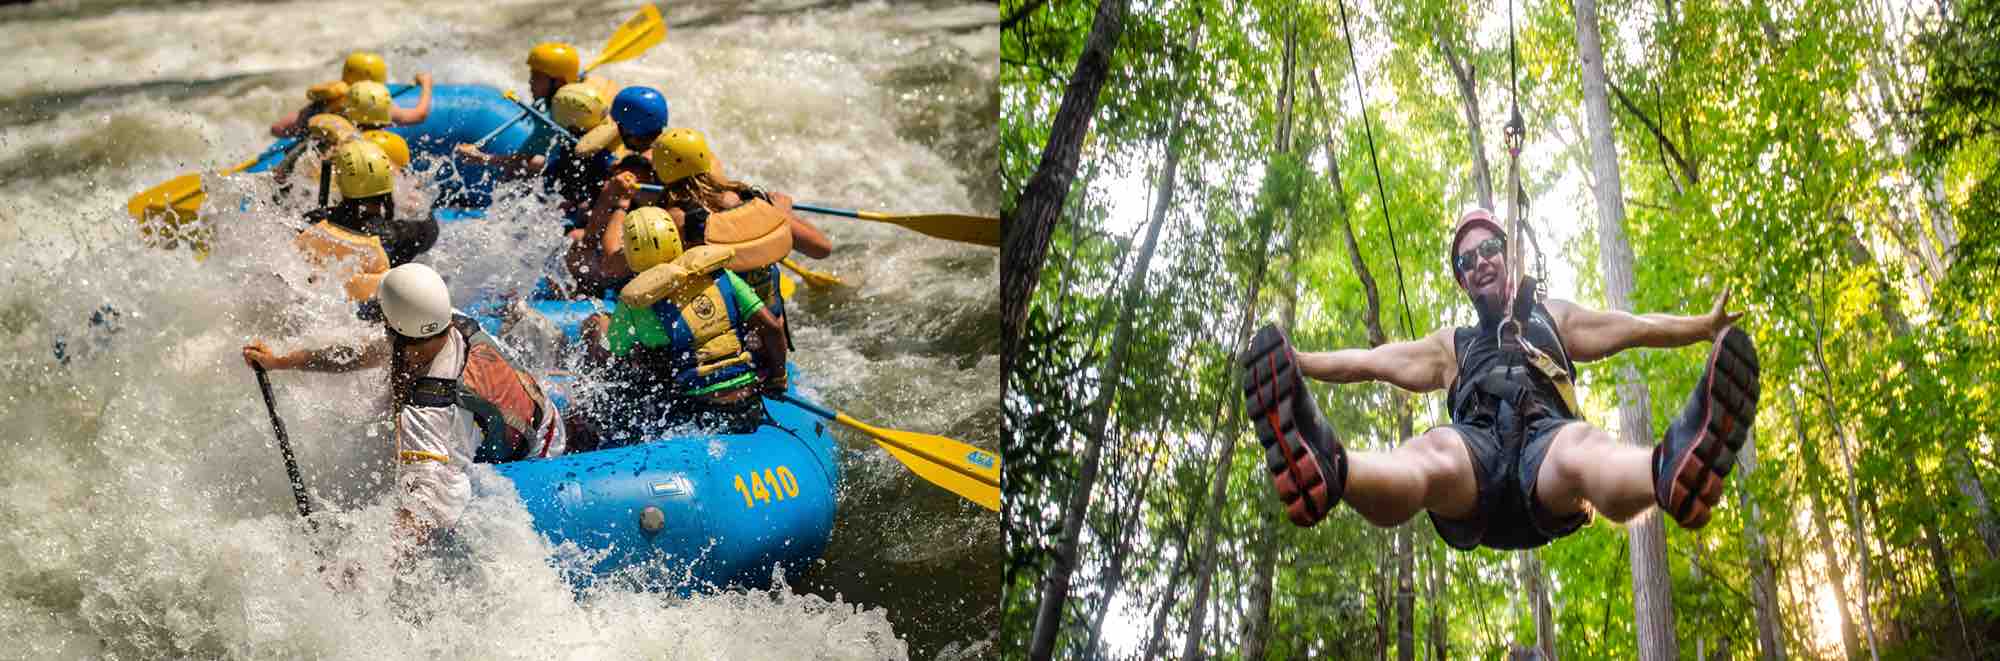 whitewater rafting in the lower new river gorge and zip lines at ace adventure resort 